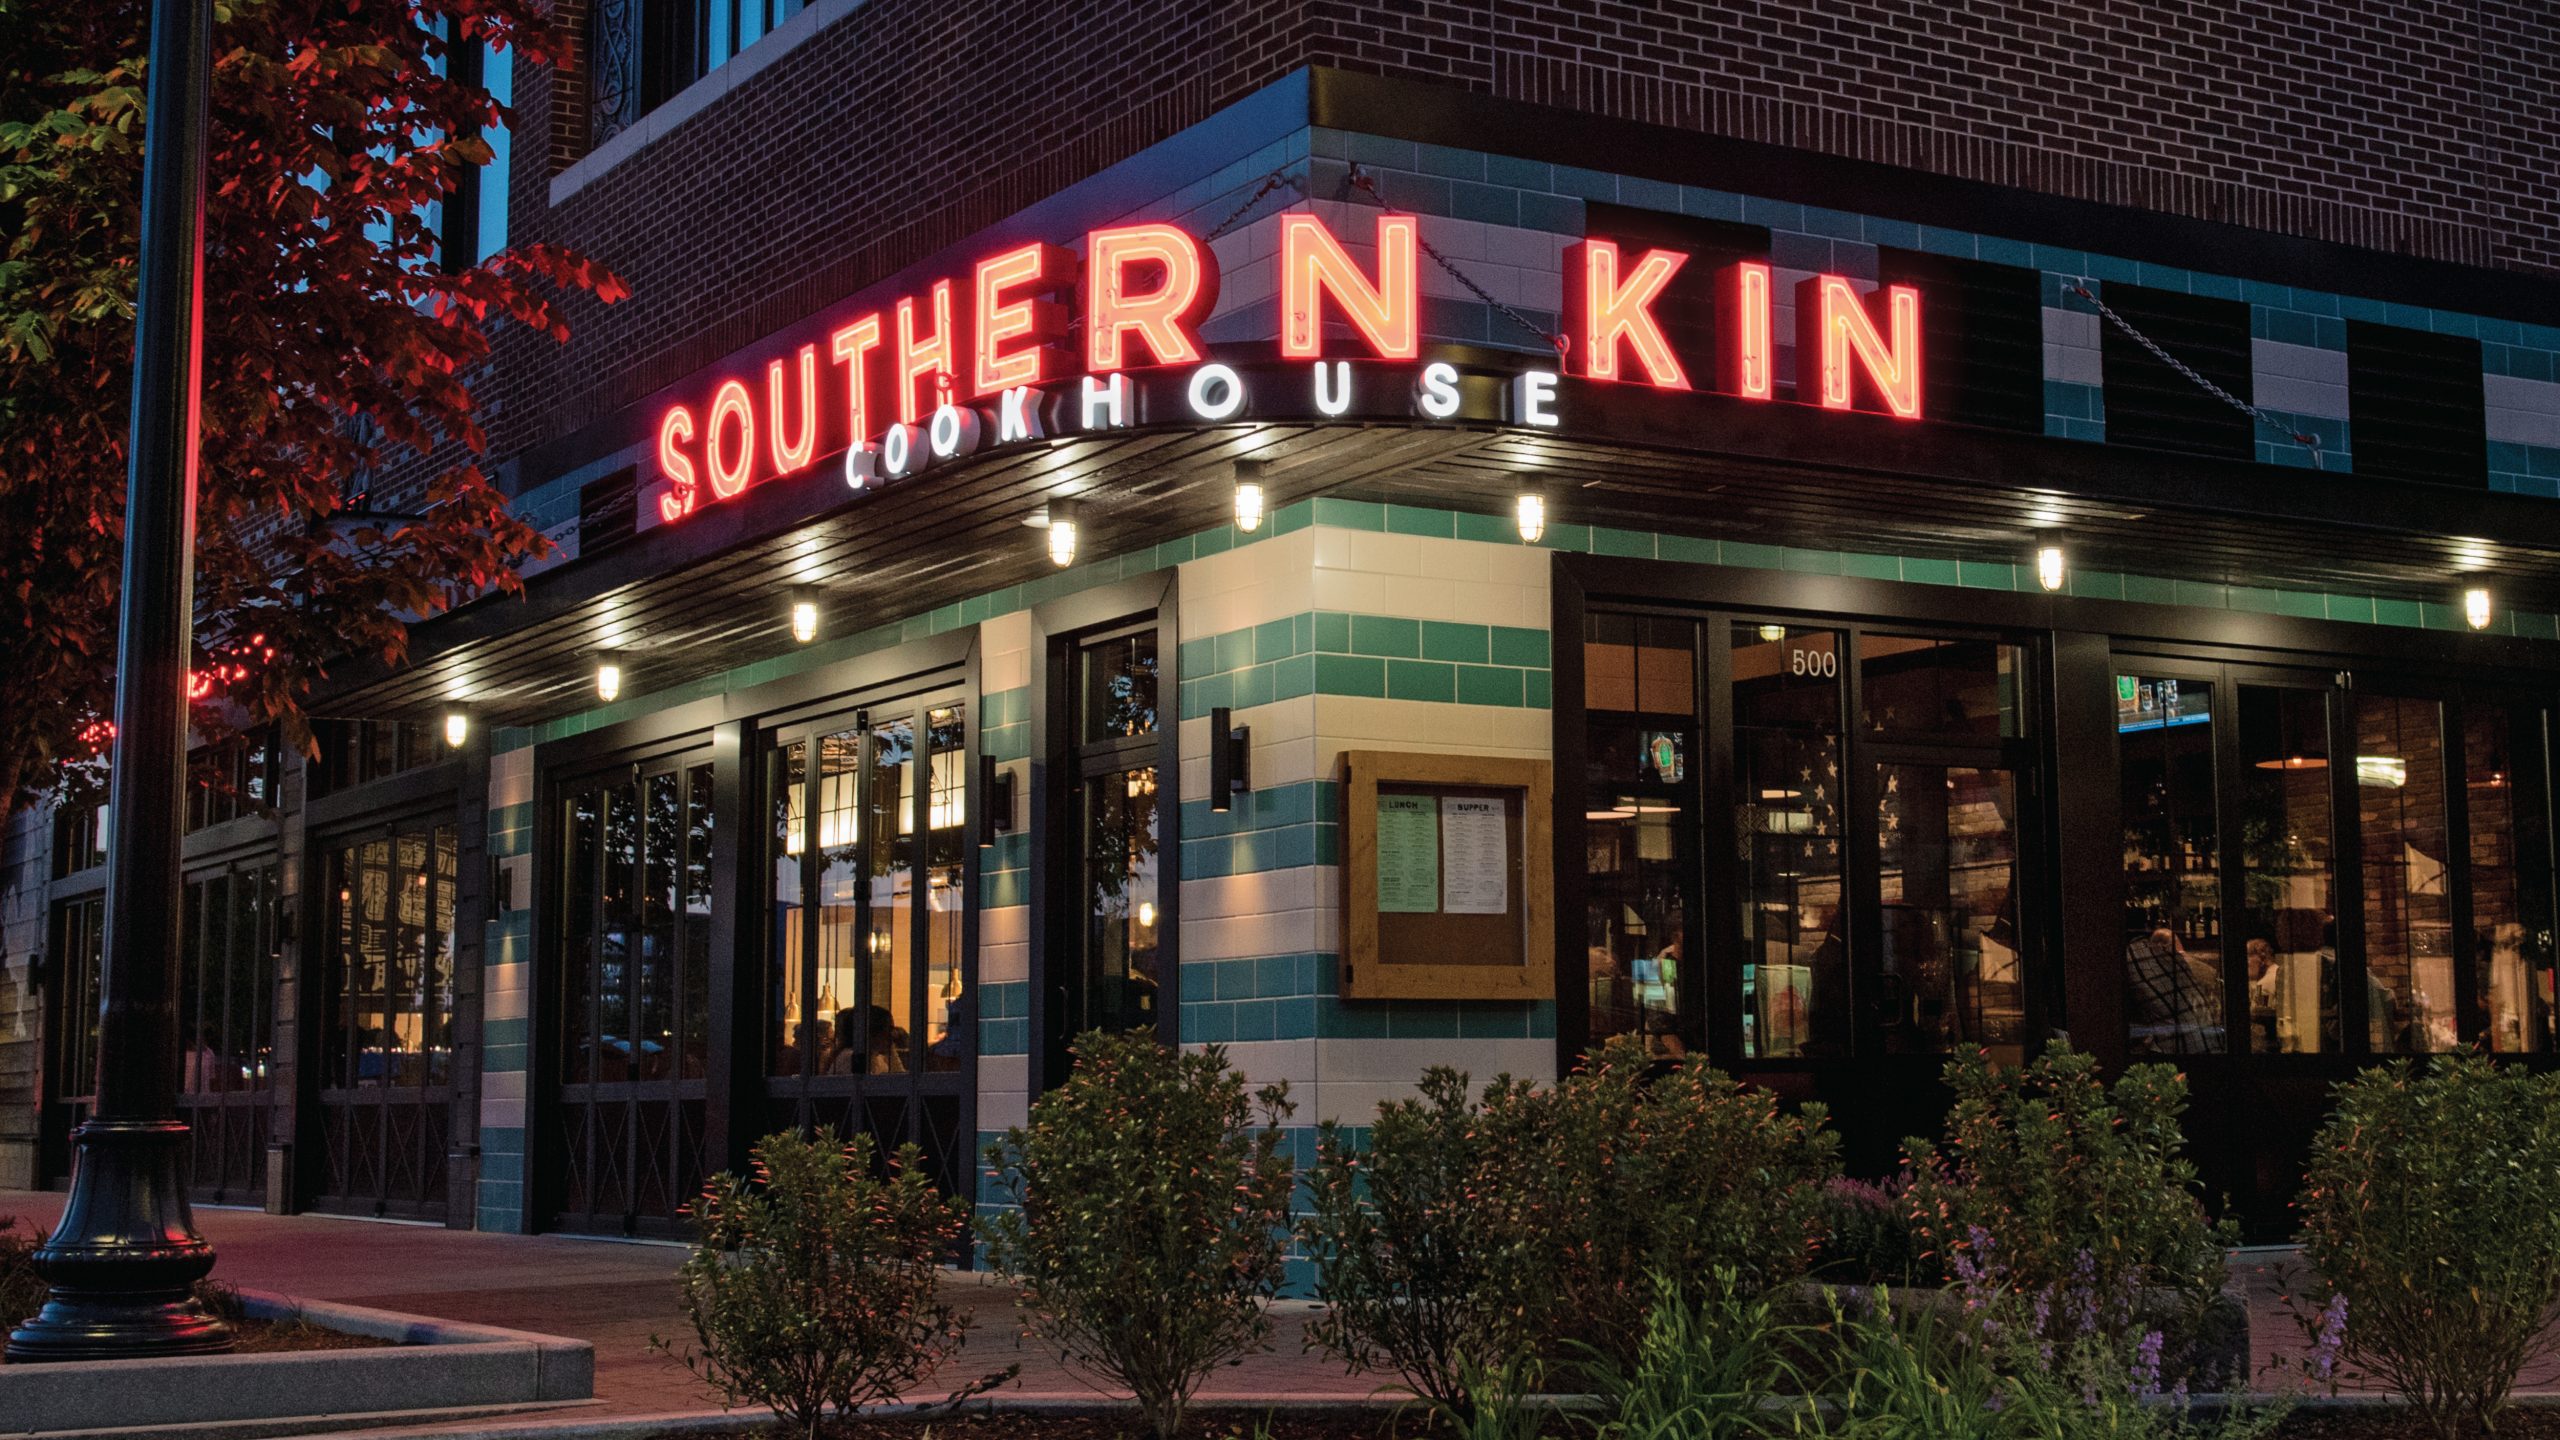 Southern Kin Cookhouse exterior